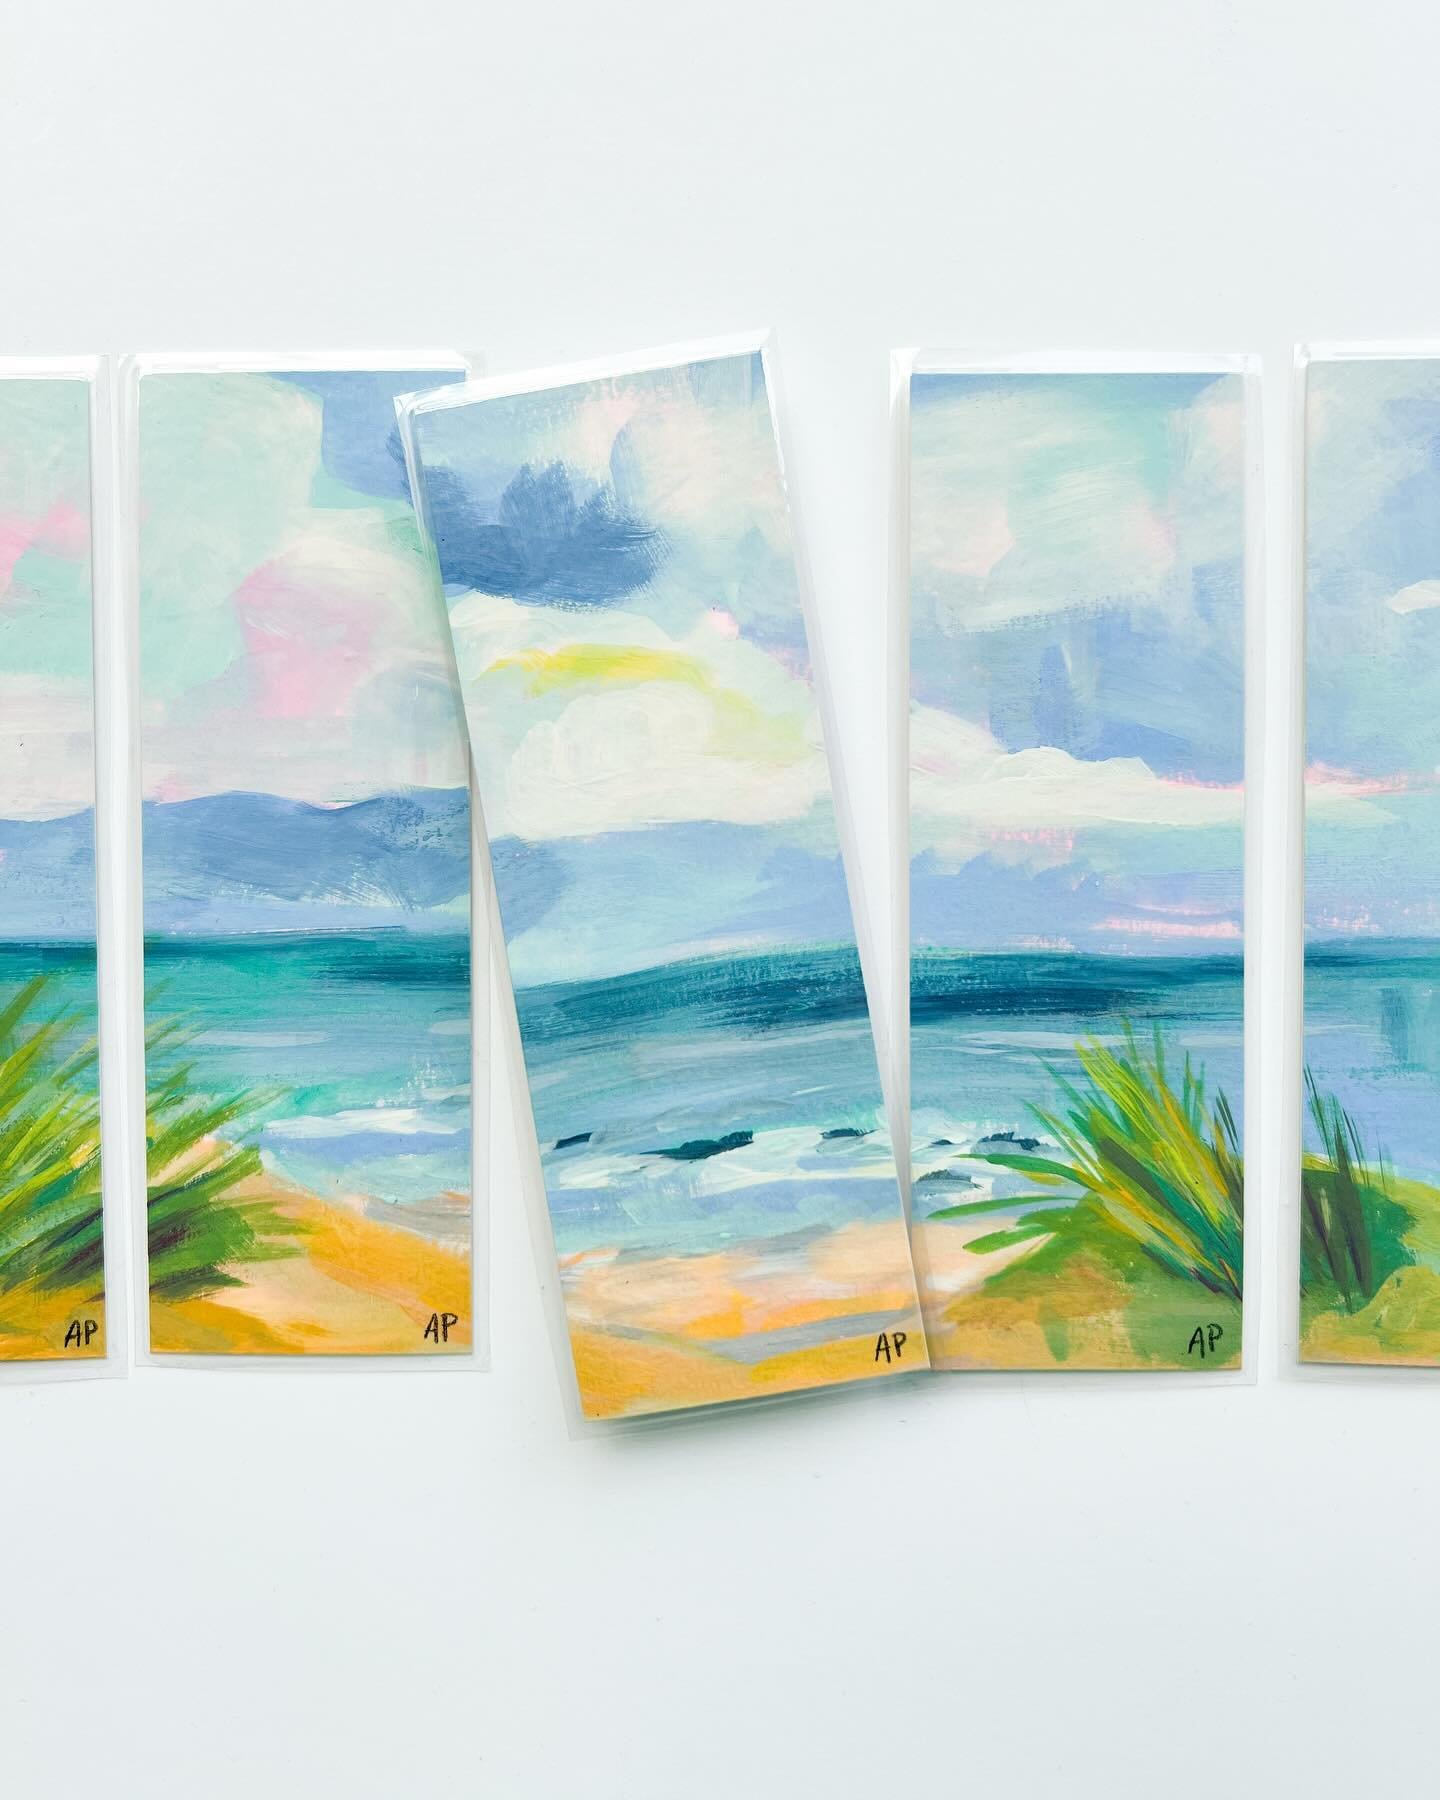 Beachy bookmarks are now in the shop! 🫶 go grab one for your summer vacay reads ☀️🏖️ The shipping is included and each bookmark is cut from an original painting, so it is like having an original piece of art every time you save a place in your favo